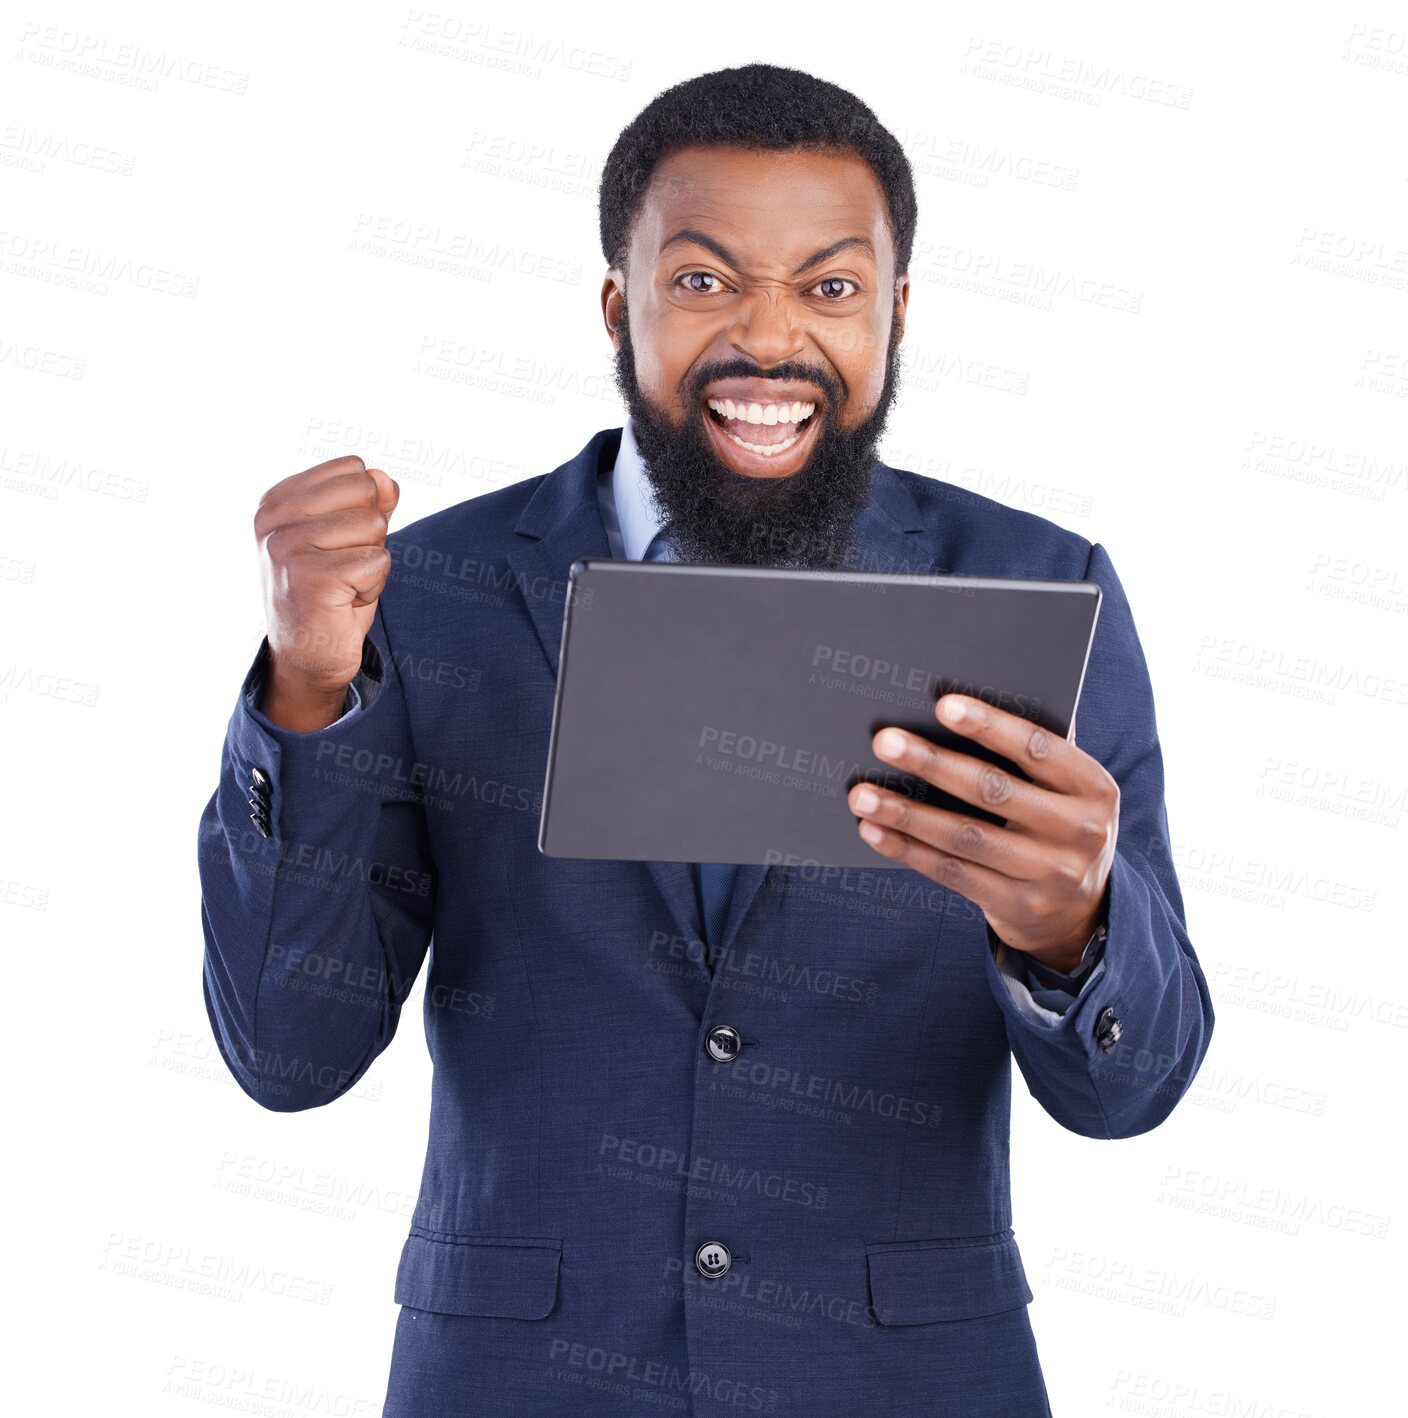 Buy stock photo Tablet, winner portrait and business man for stock market success, profit and trading, bonus and yes. Celebration, winning and african person or digital trader isolated on transparent, png background